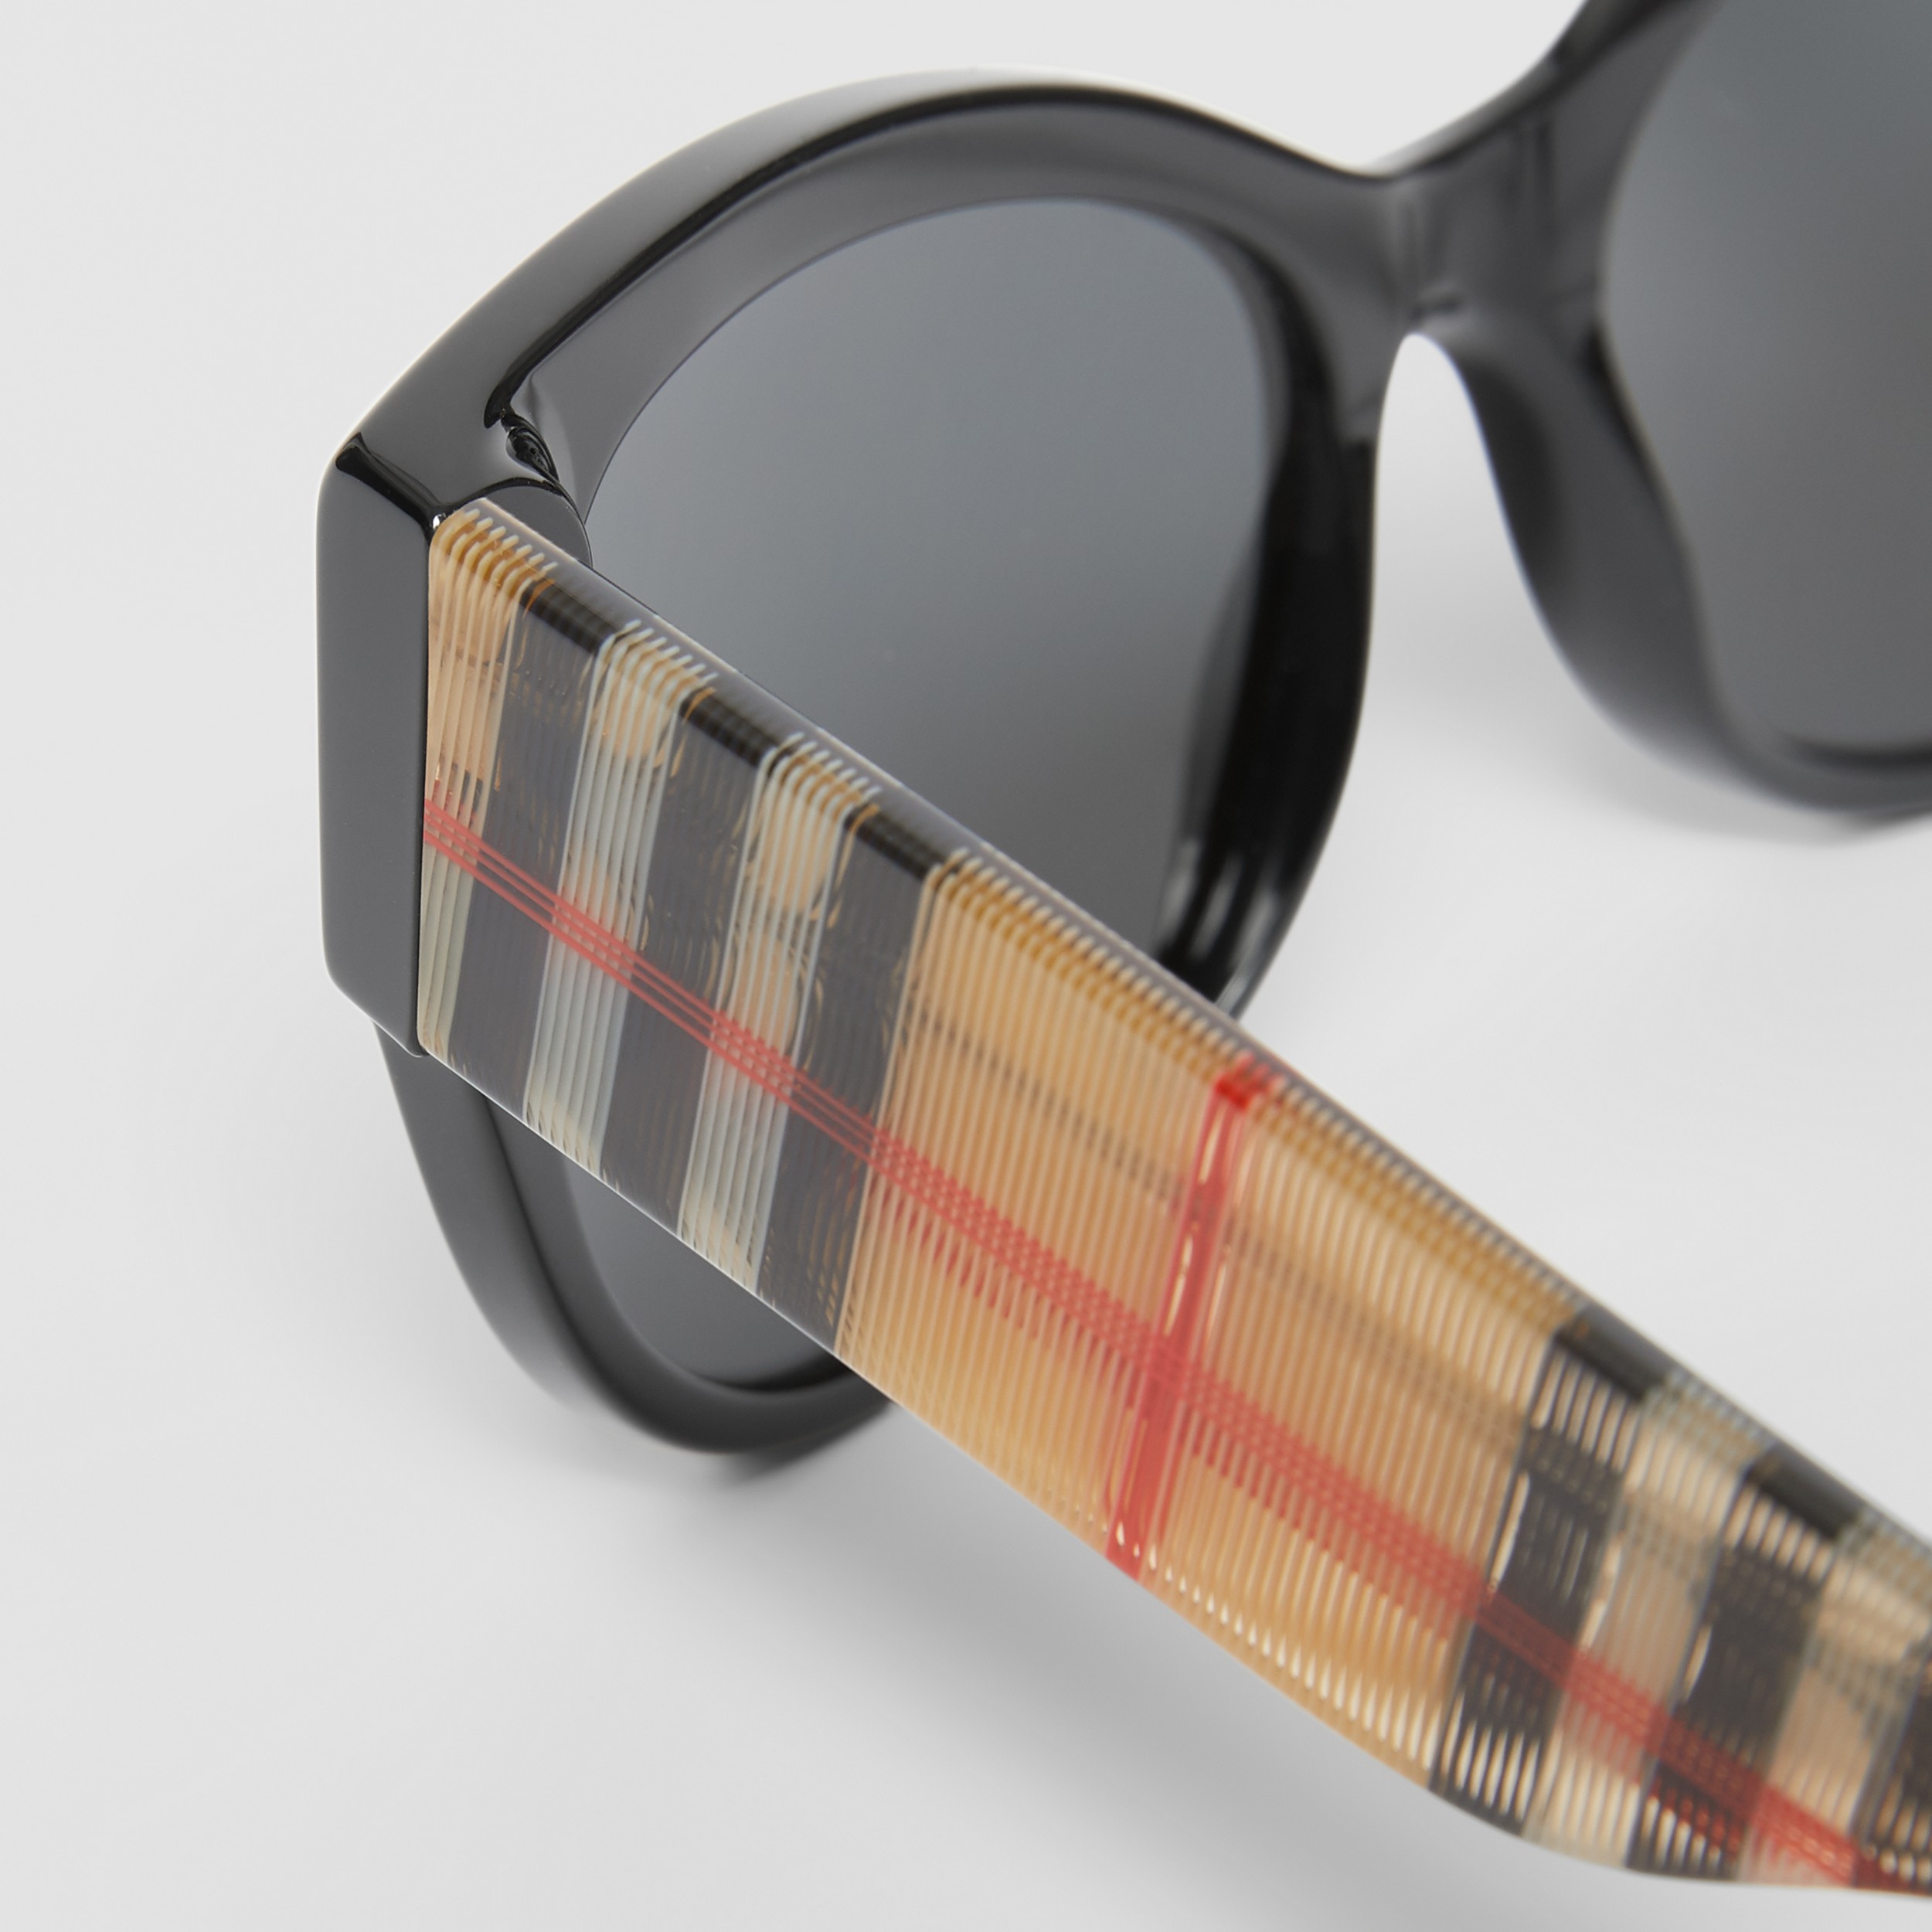 Vintage Check Detail Butterfly Frame Sunglasses in Black/beige - Women | Burberry® Official - 2